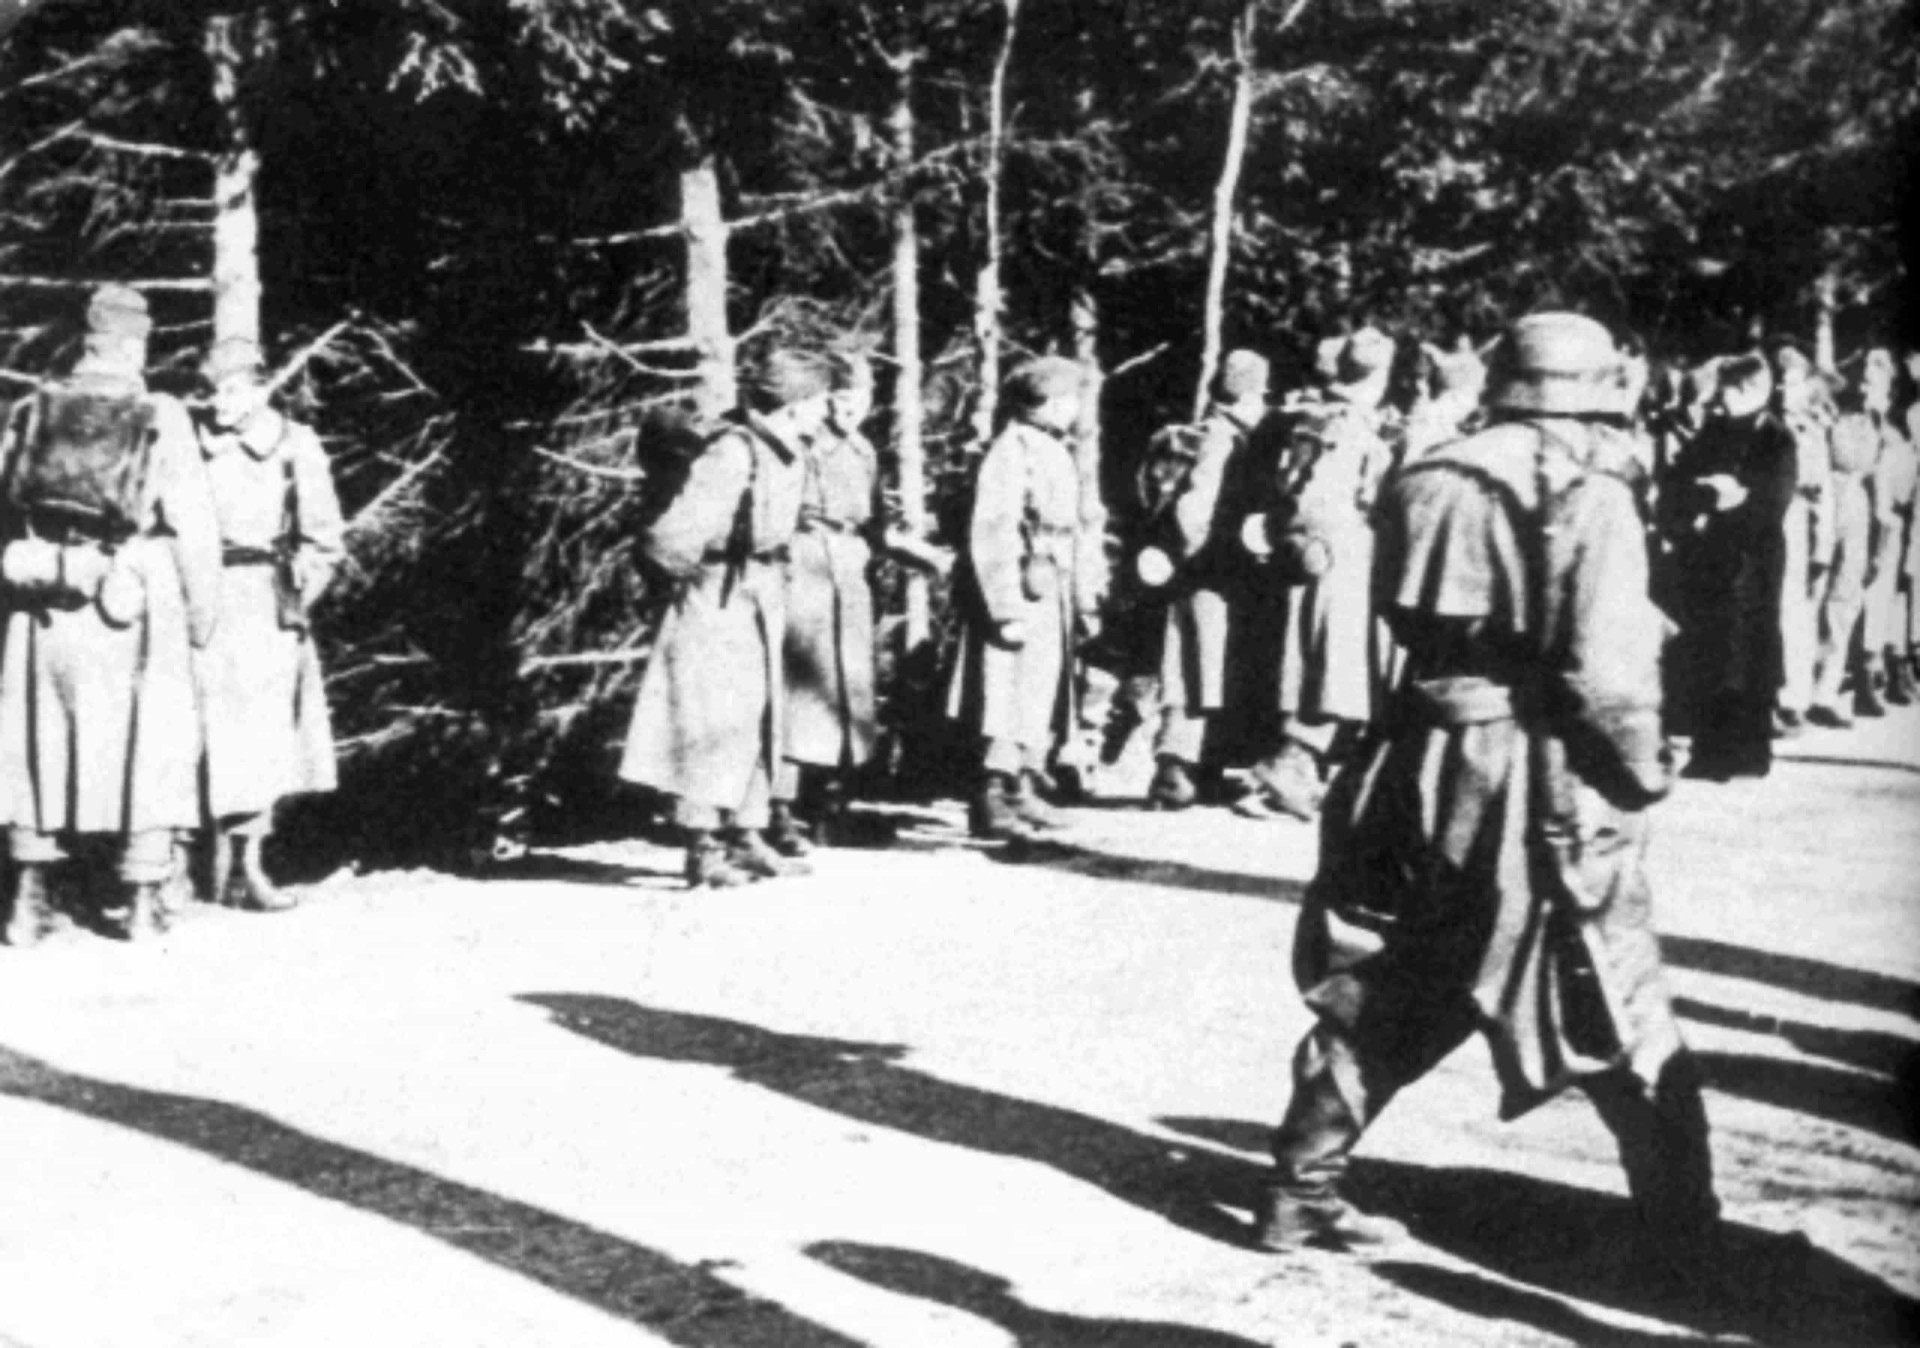 <p>German forces encountered resistance at Bjergskov when Danish troops established a roadblock to impede their progress. Despite outnumbering the Danes, the German troops swiftly subdued the opposition, resulting in the capture of Danish prisoners of war.</p><p>You may also like:<a href="https://www.starsinsider.com/n/159290?utm_source=msn.com&utm_medium=display&utm_campaign=referral_description&utm_content=656672en-my"> Celebrities who have been to rehab</a></p>